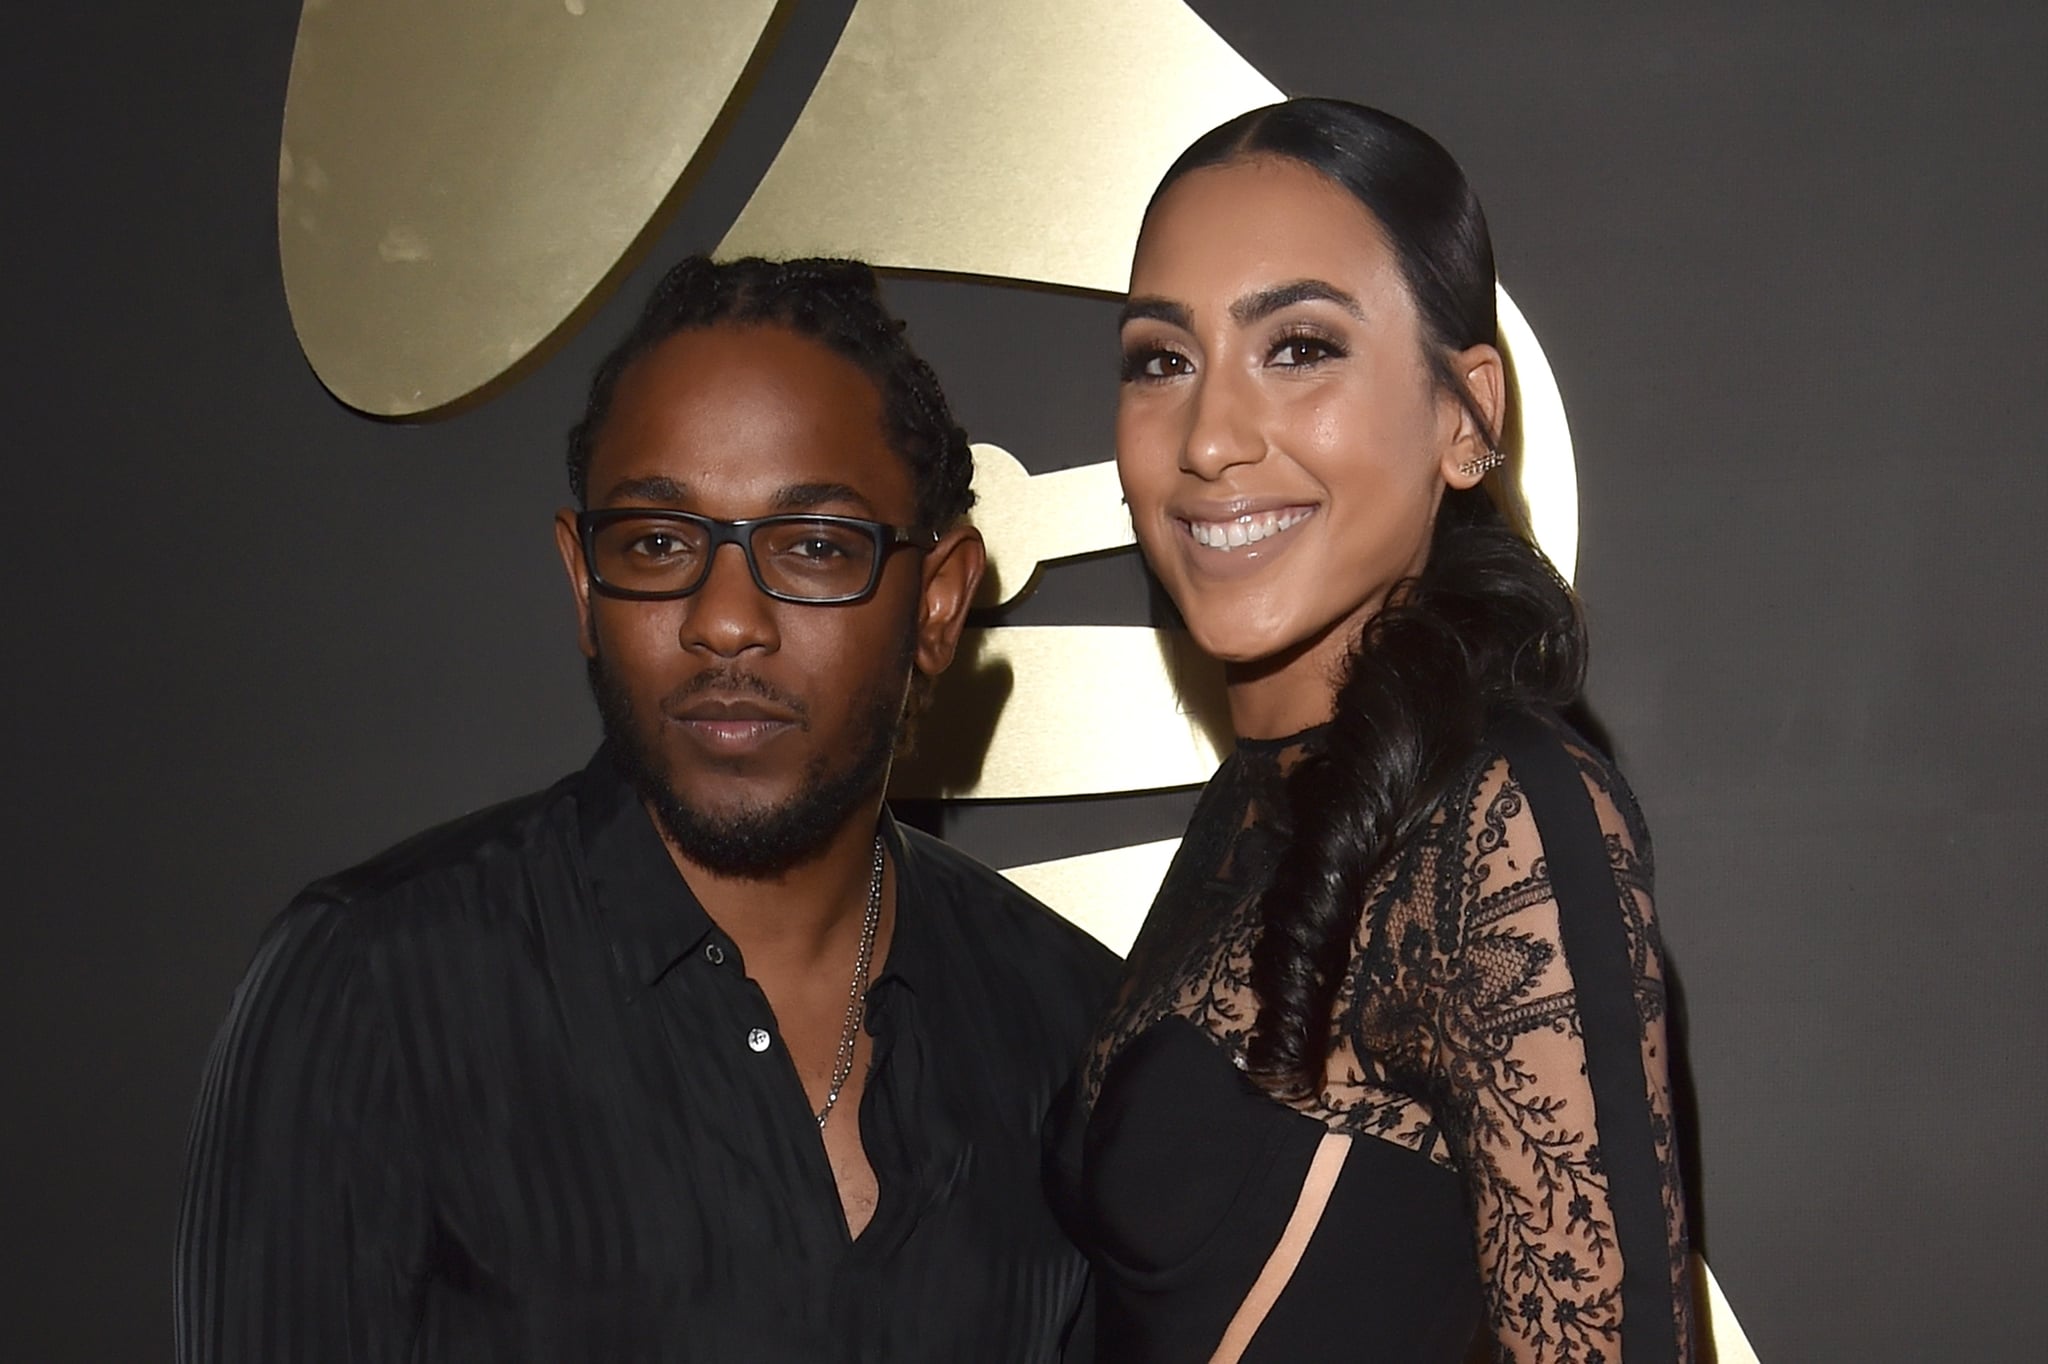 Kendrick Lamar and Whitney Alford at the 2016 Grammy Awards in Los Angeles, California.